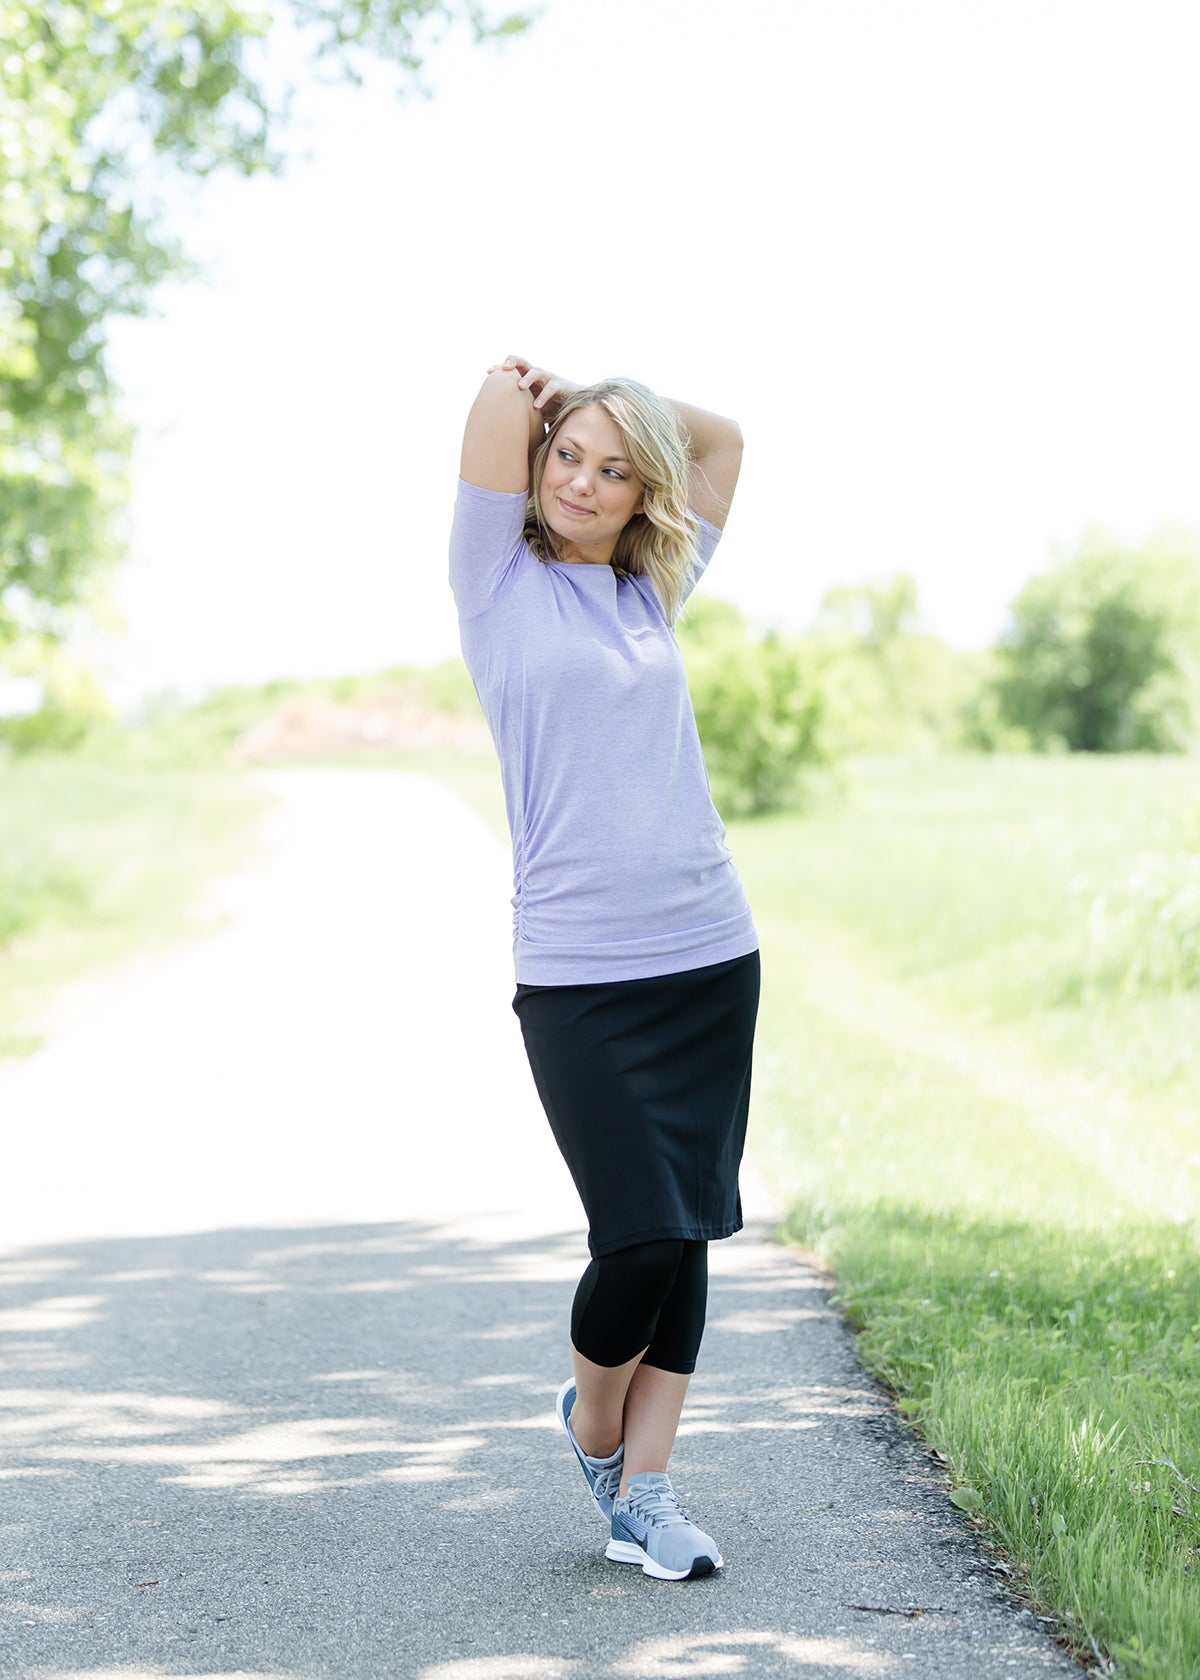 lightweight, quick-drying fabric performance tee in mint, pink, gray and purple!